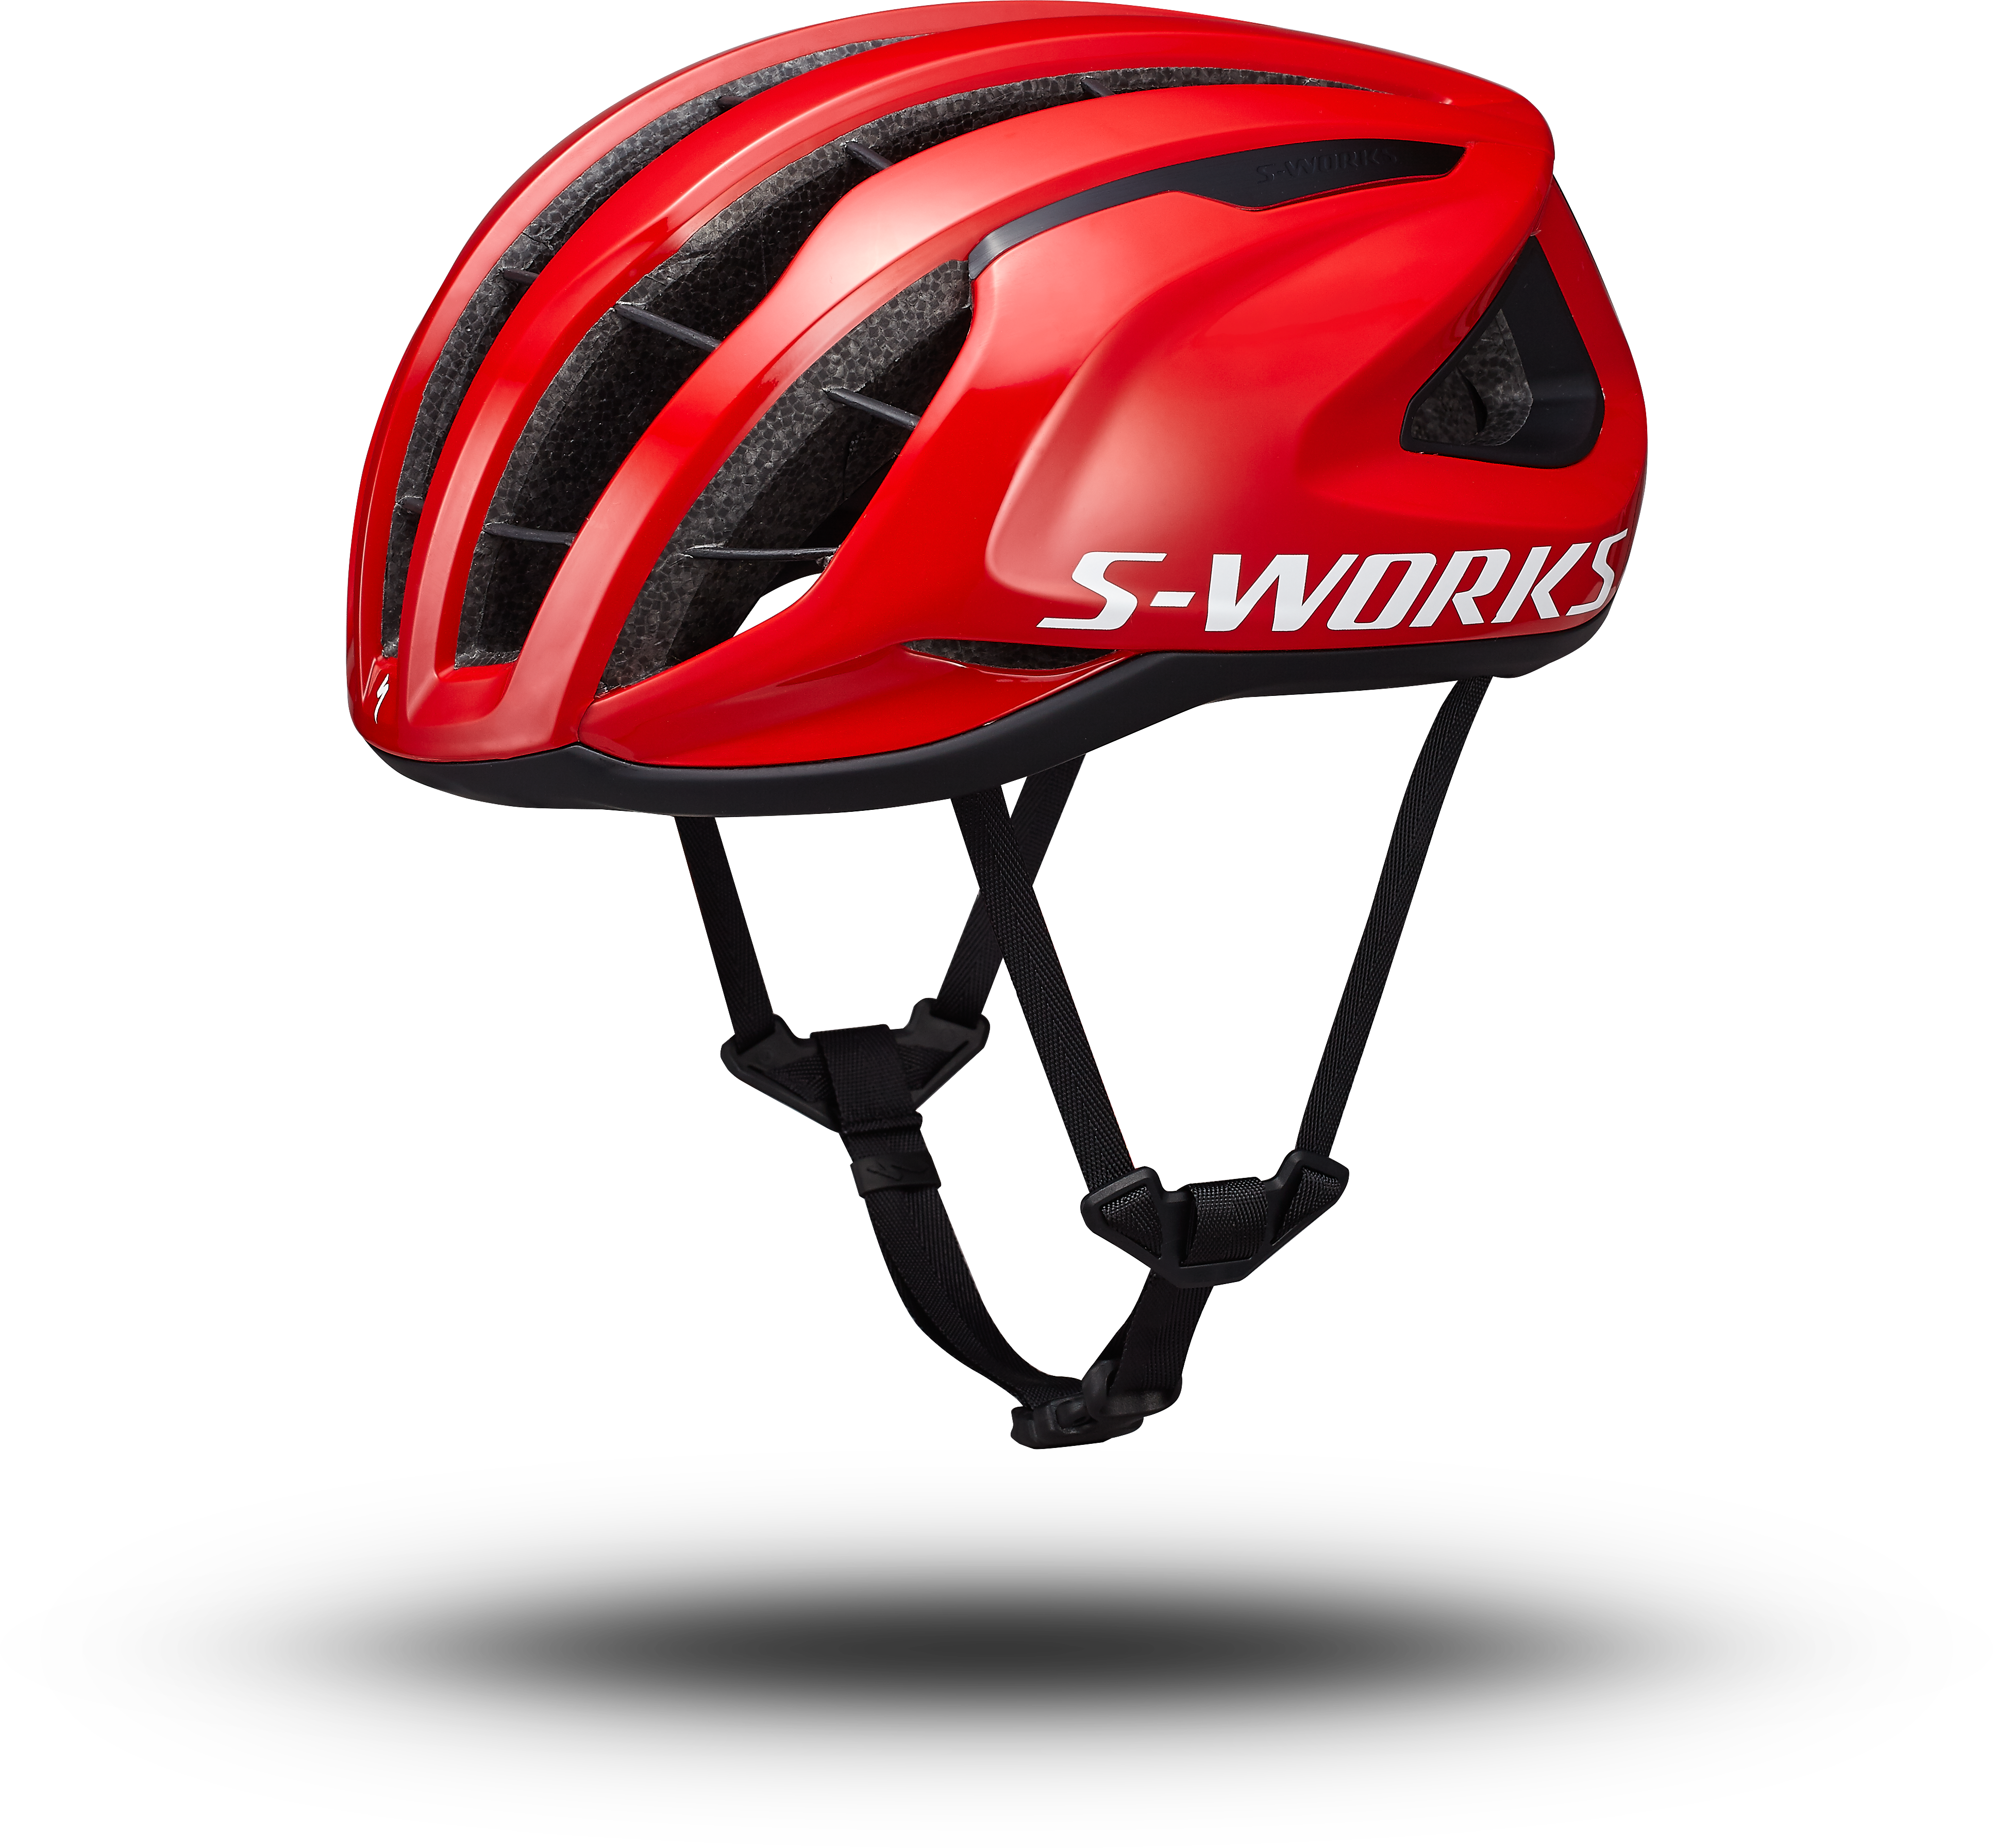 S-WORKS PREVAIL 3  ヘルメット　スペシャライズド　ロードバイク値段を変更致します